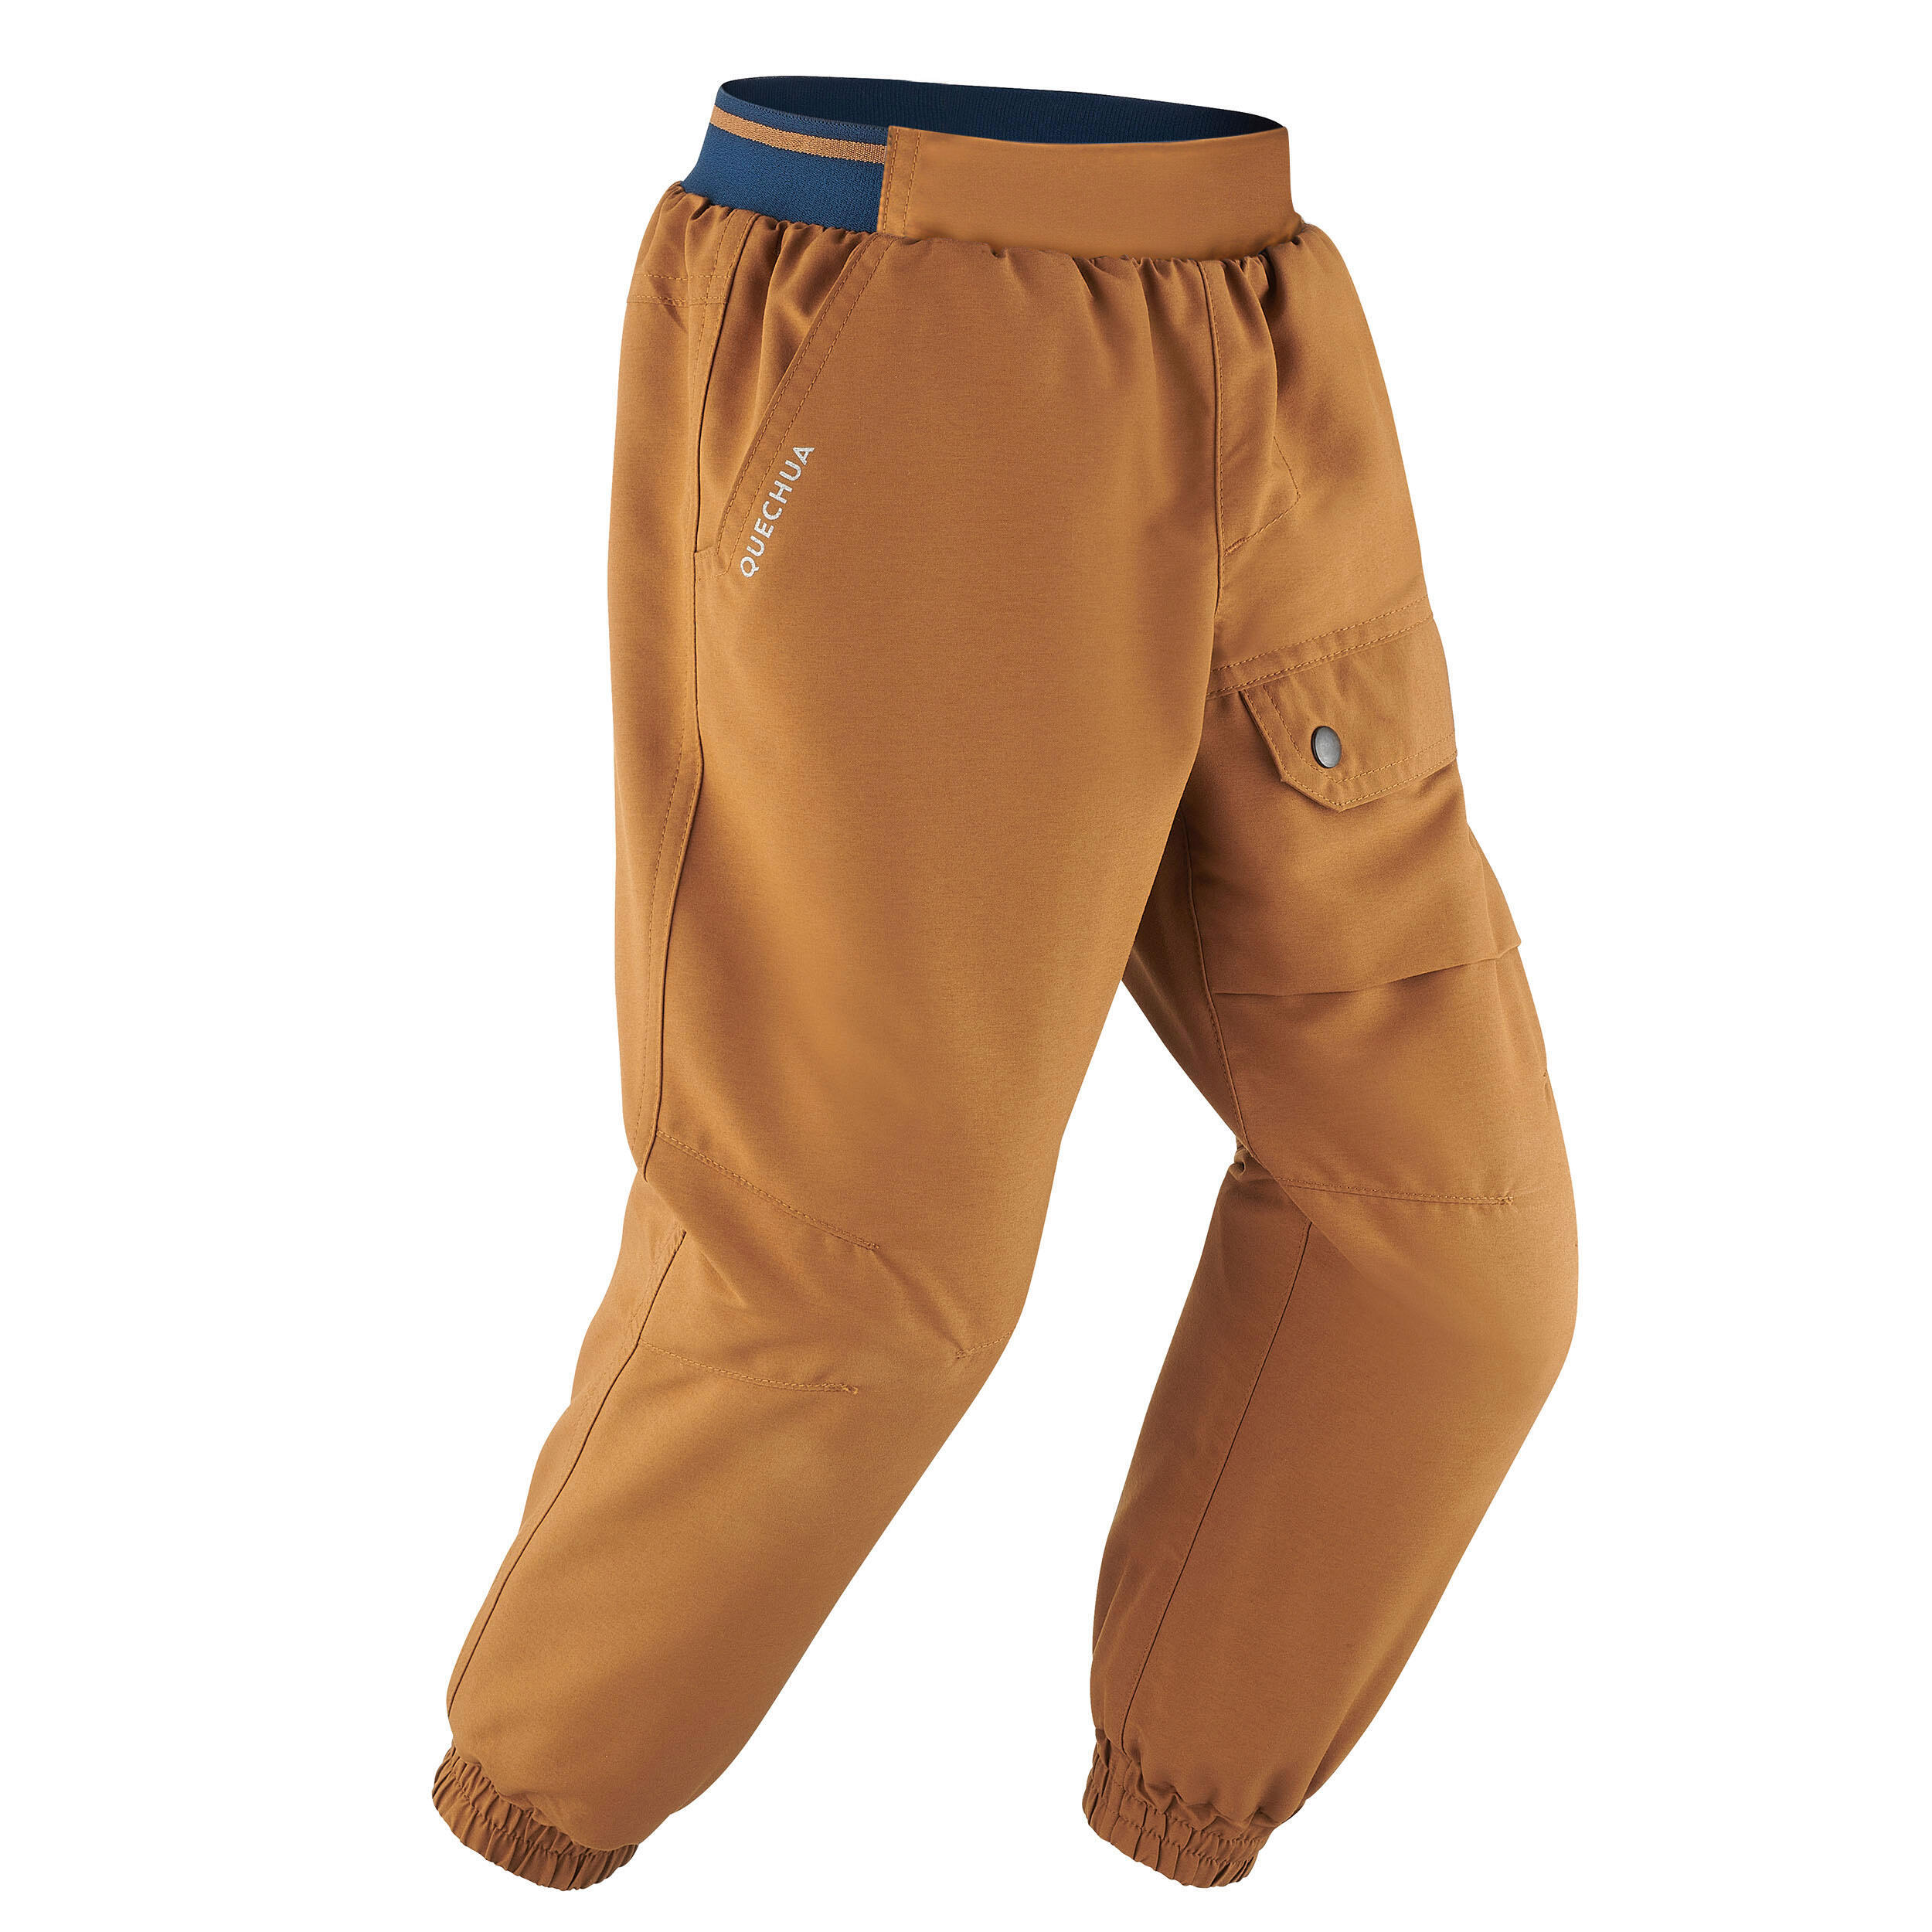 Children's warm water-repellent hiking trousers - SH100 - age 2-6 4/10